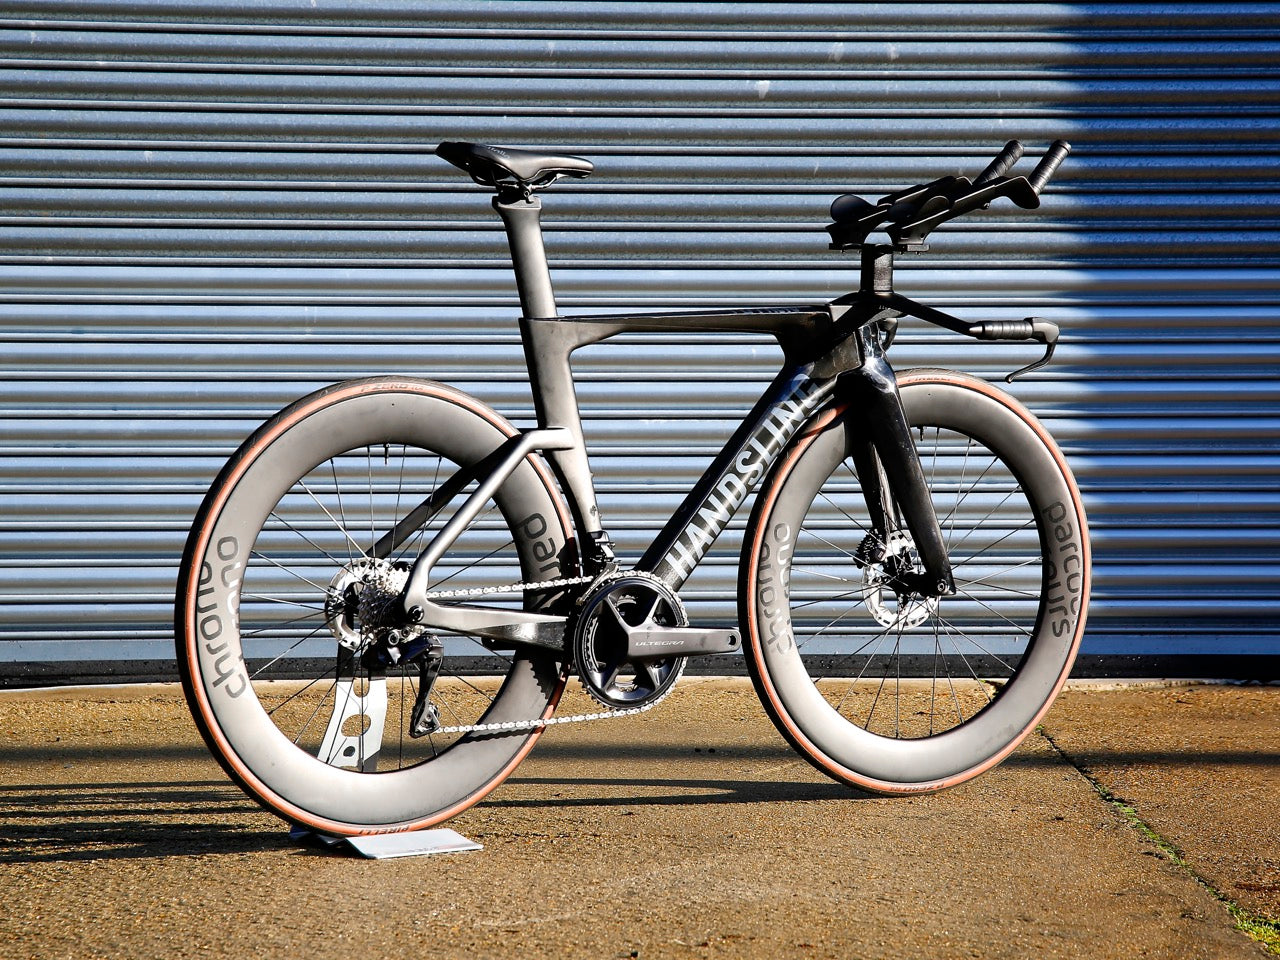 Handsling launches TSTRevo time trial frame